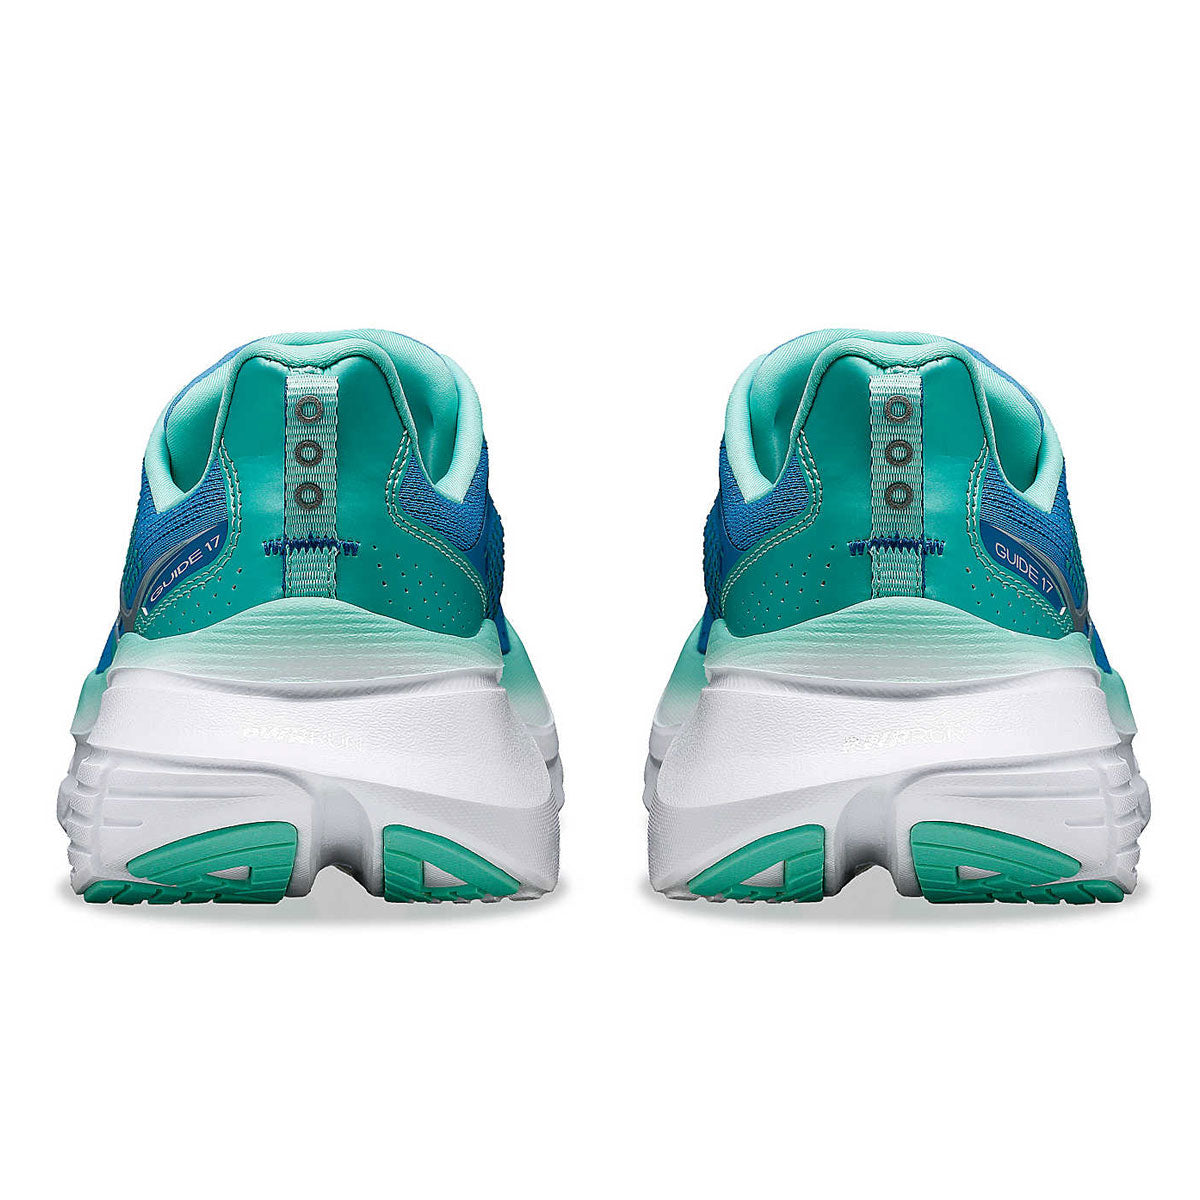 Saucony Guide 17 Running Shoes - Womens - Breeze/Mint